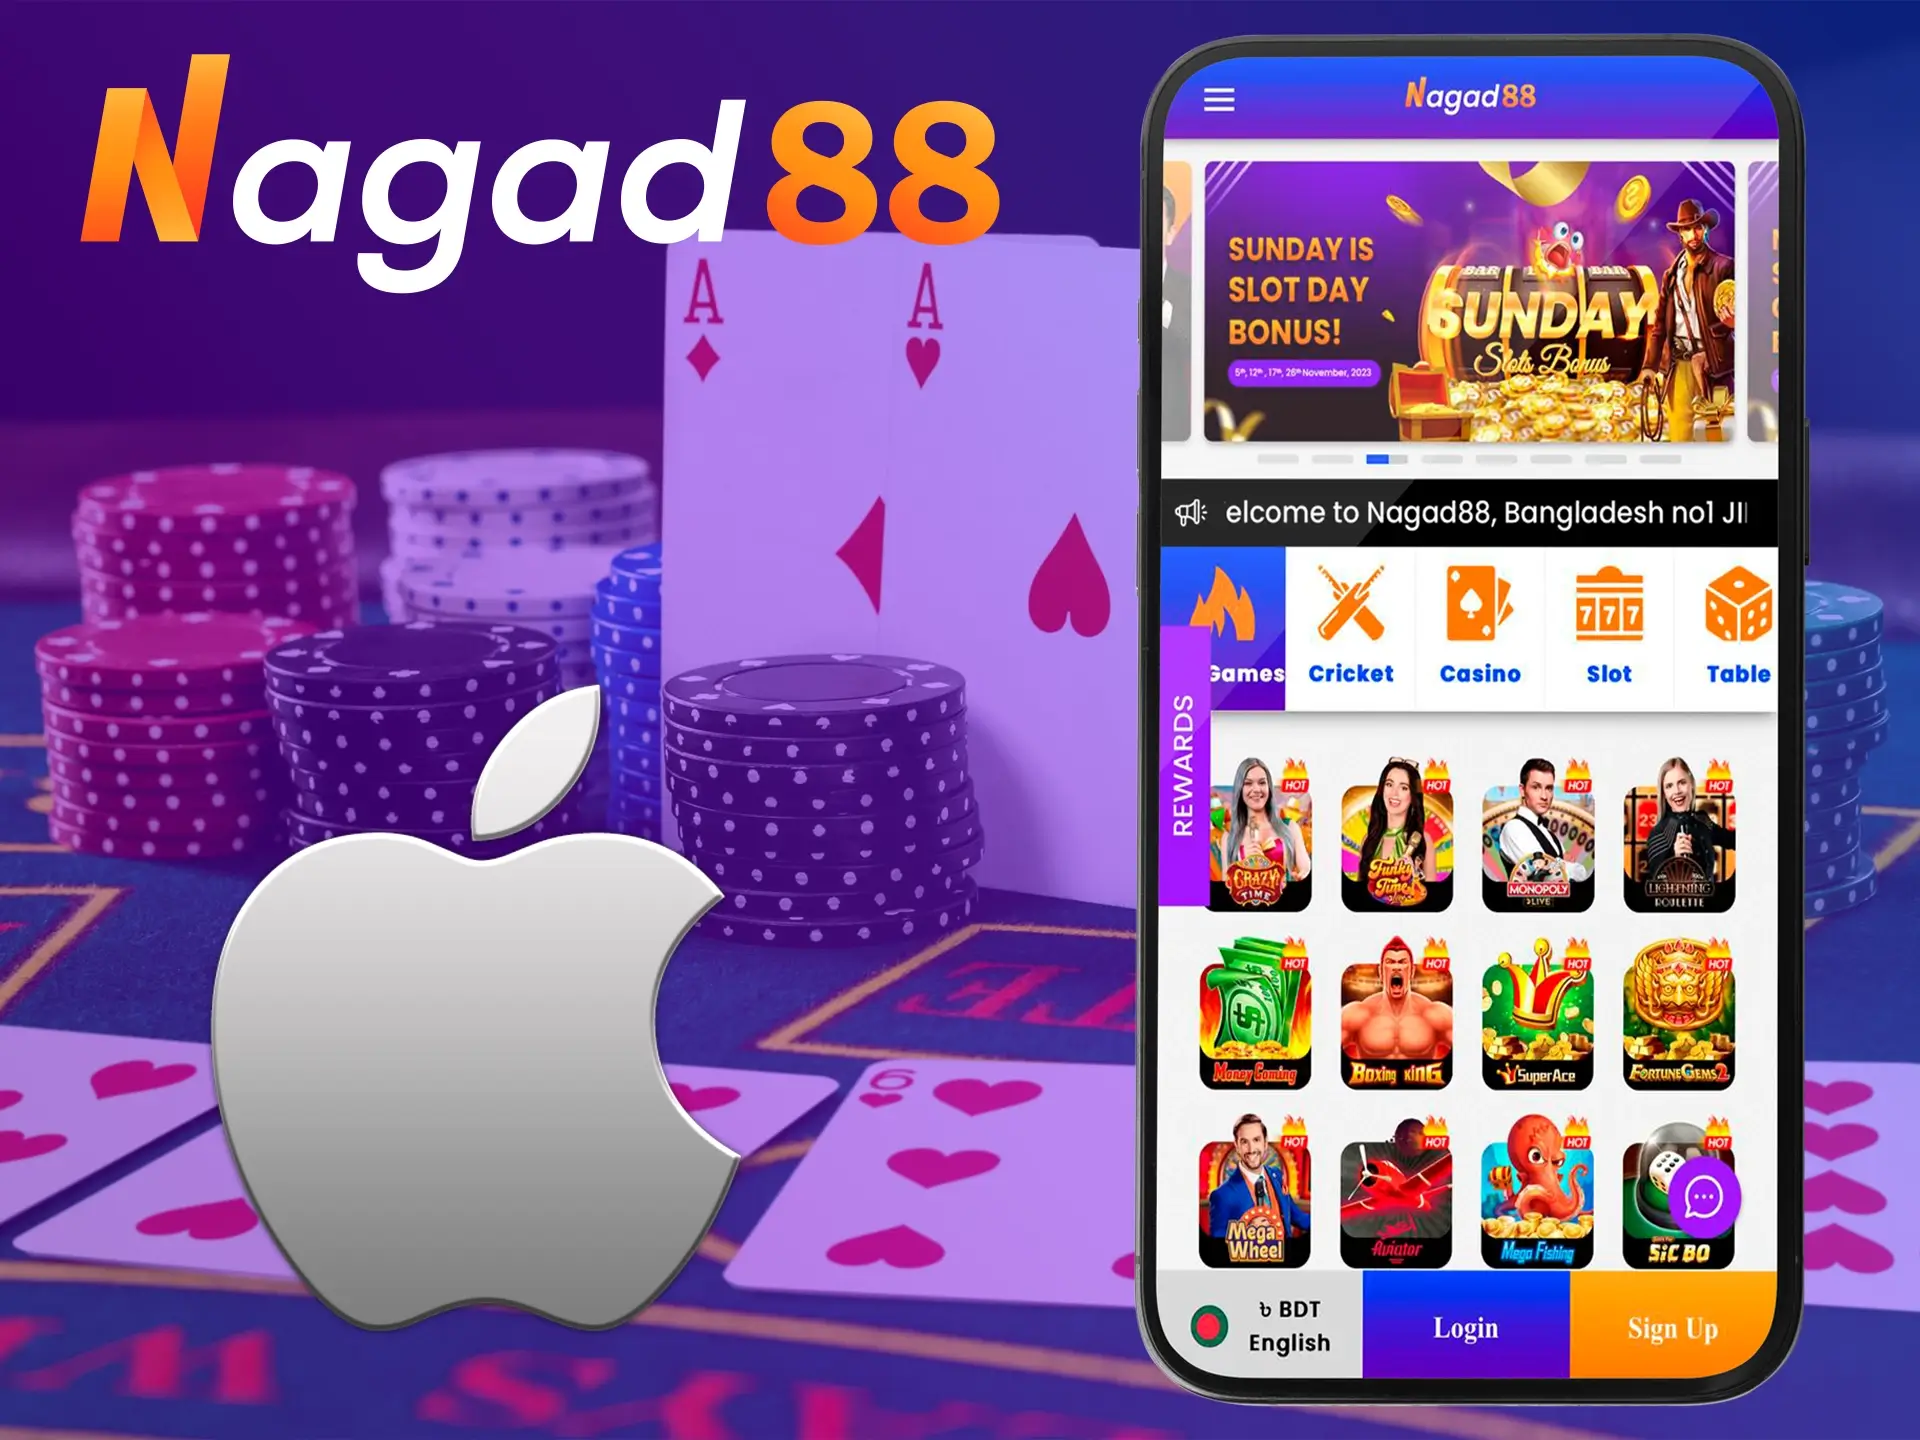 Ios devices are great for the Nagad88 casino site.